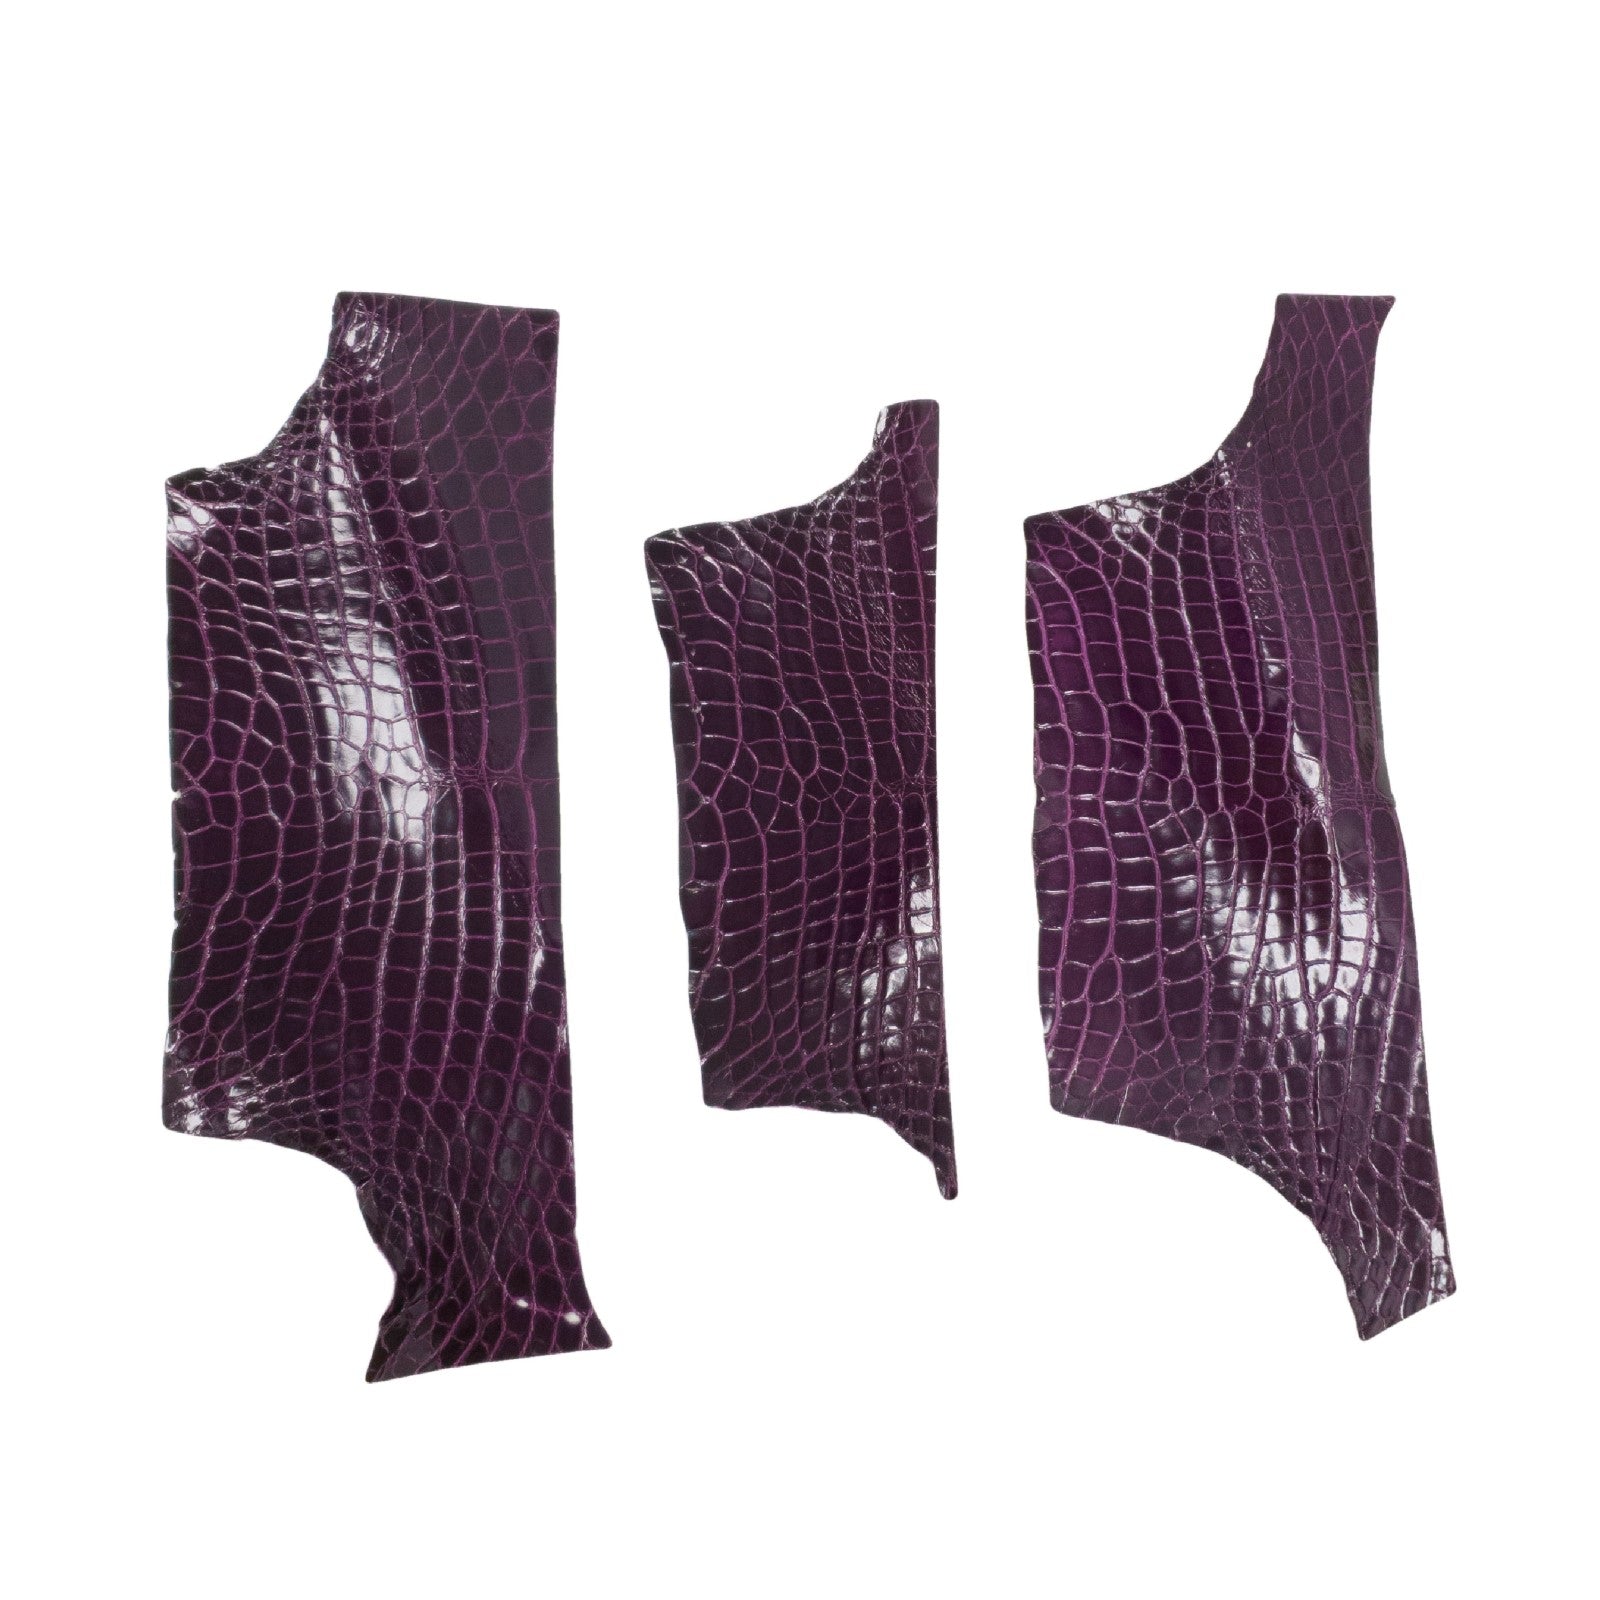 Alligator Skin Pieces Various Colors Genuine Hide, Purple / Piece 2 | The Leather Guy